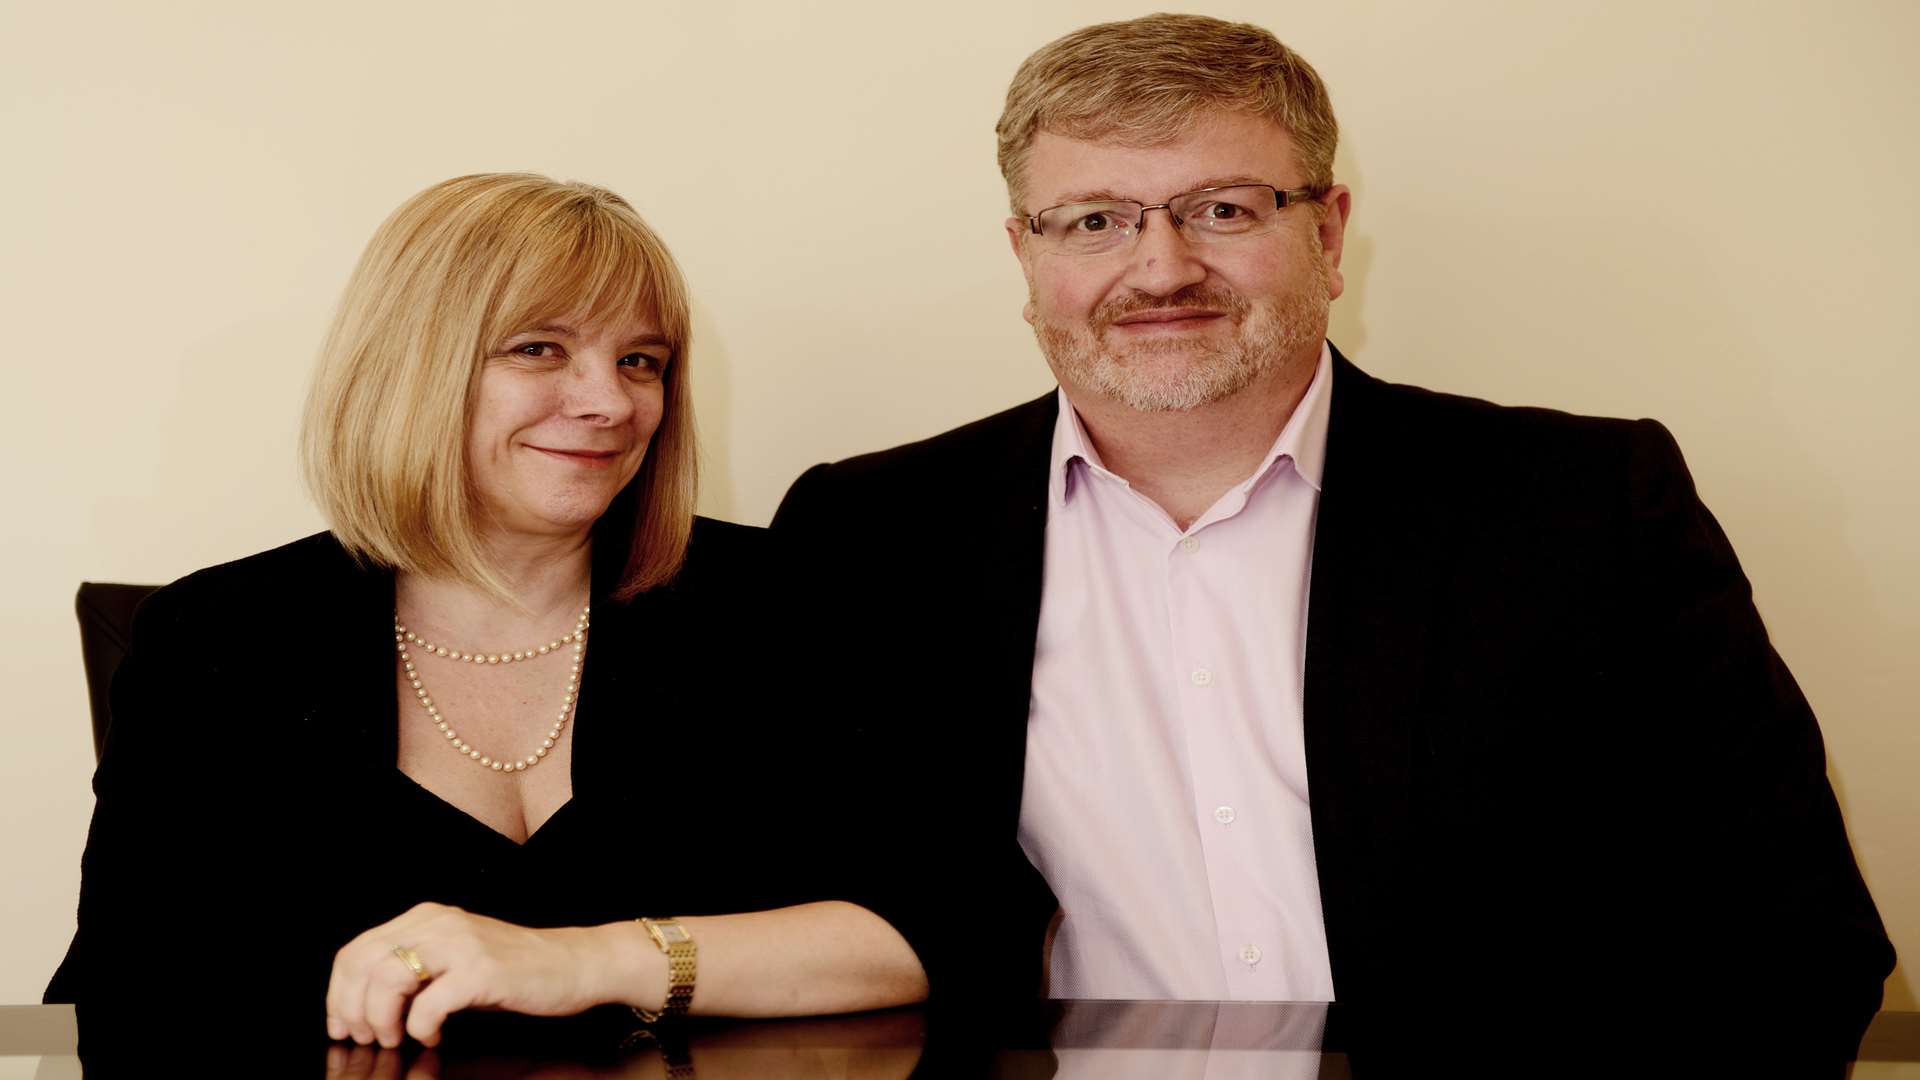 Facts & Figures founders Simon and Pam Webster